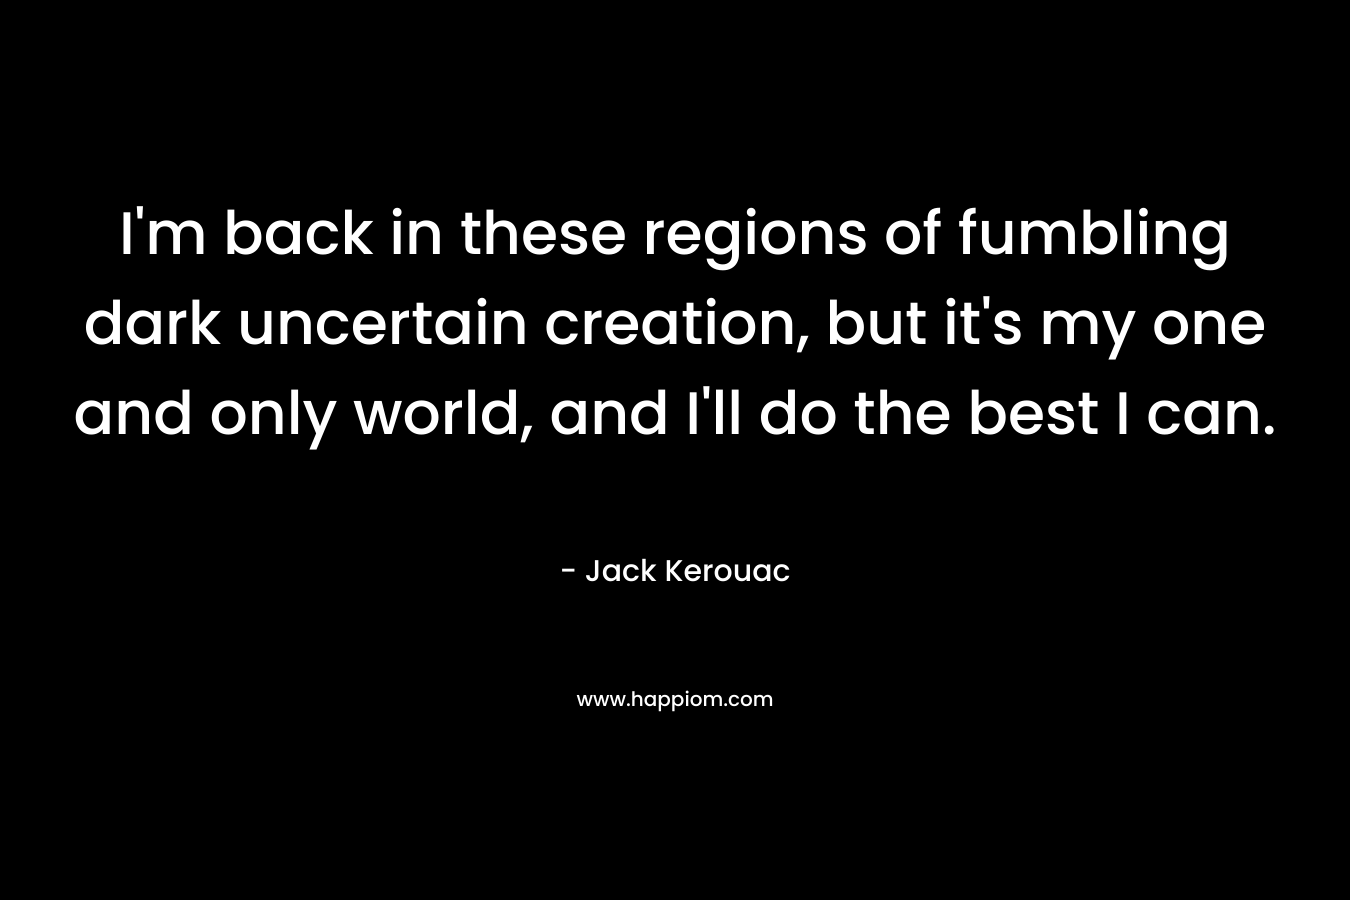 I’m back in these regions of fumbling dark uncertain creation, but it’s my one and only world, and I’ll do the best I can. – Jack Kerouac